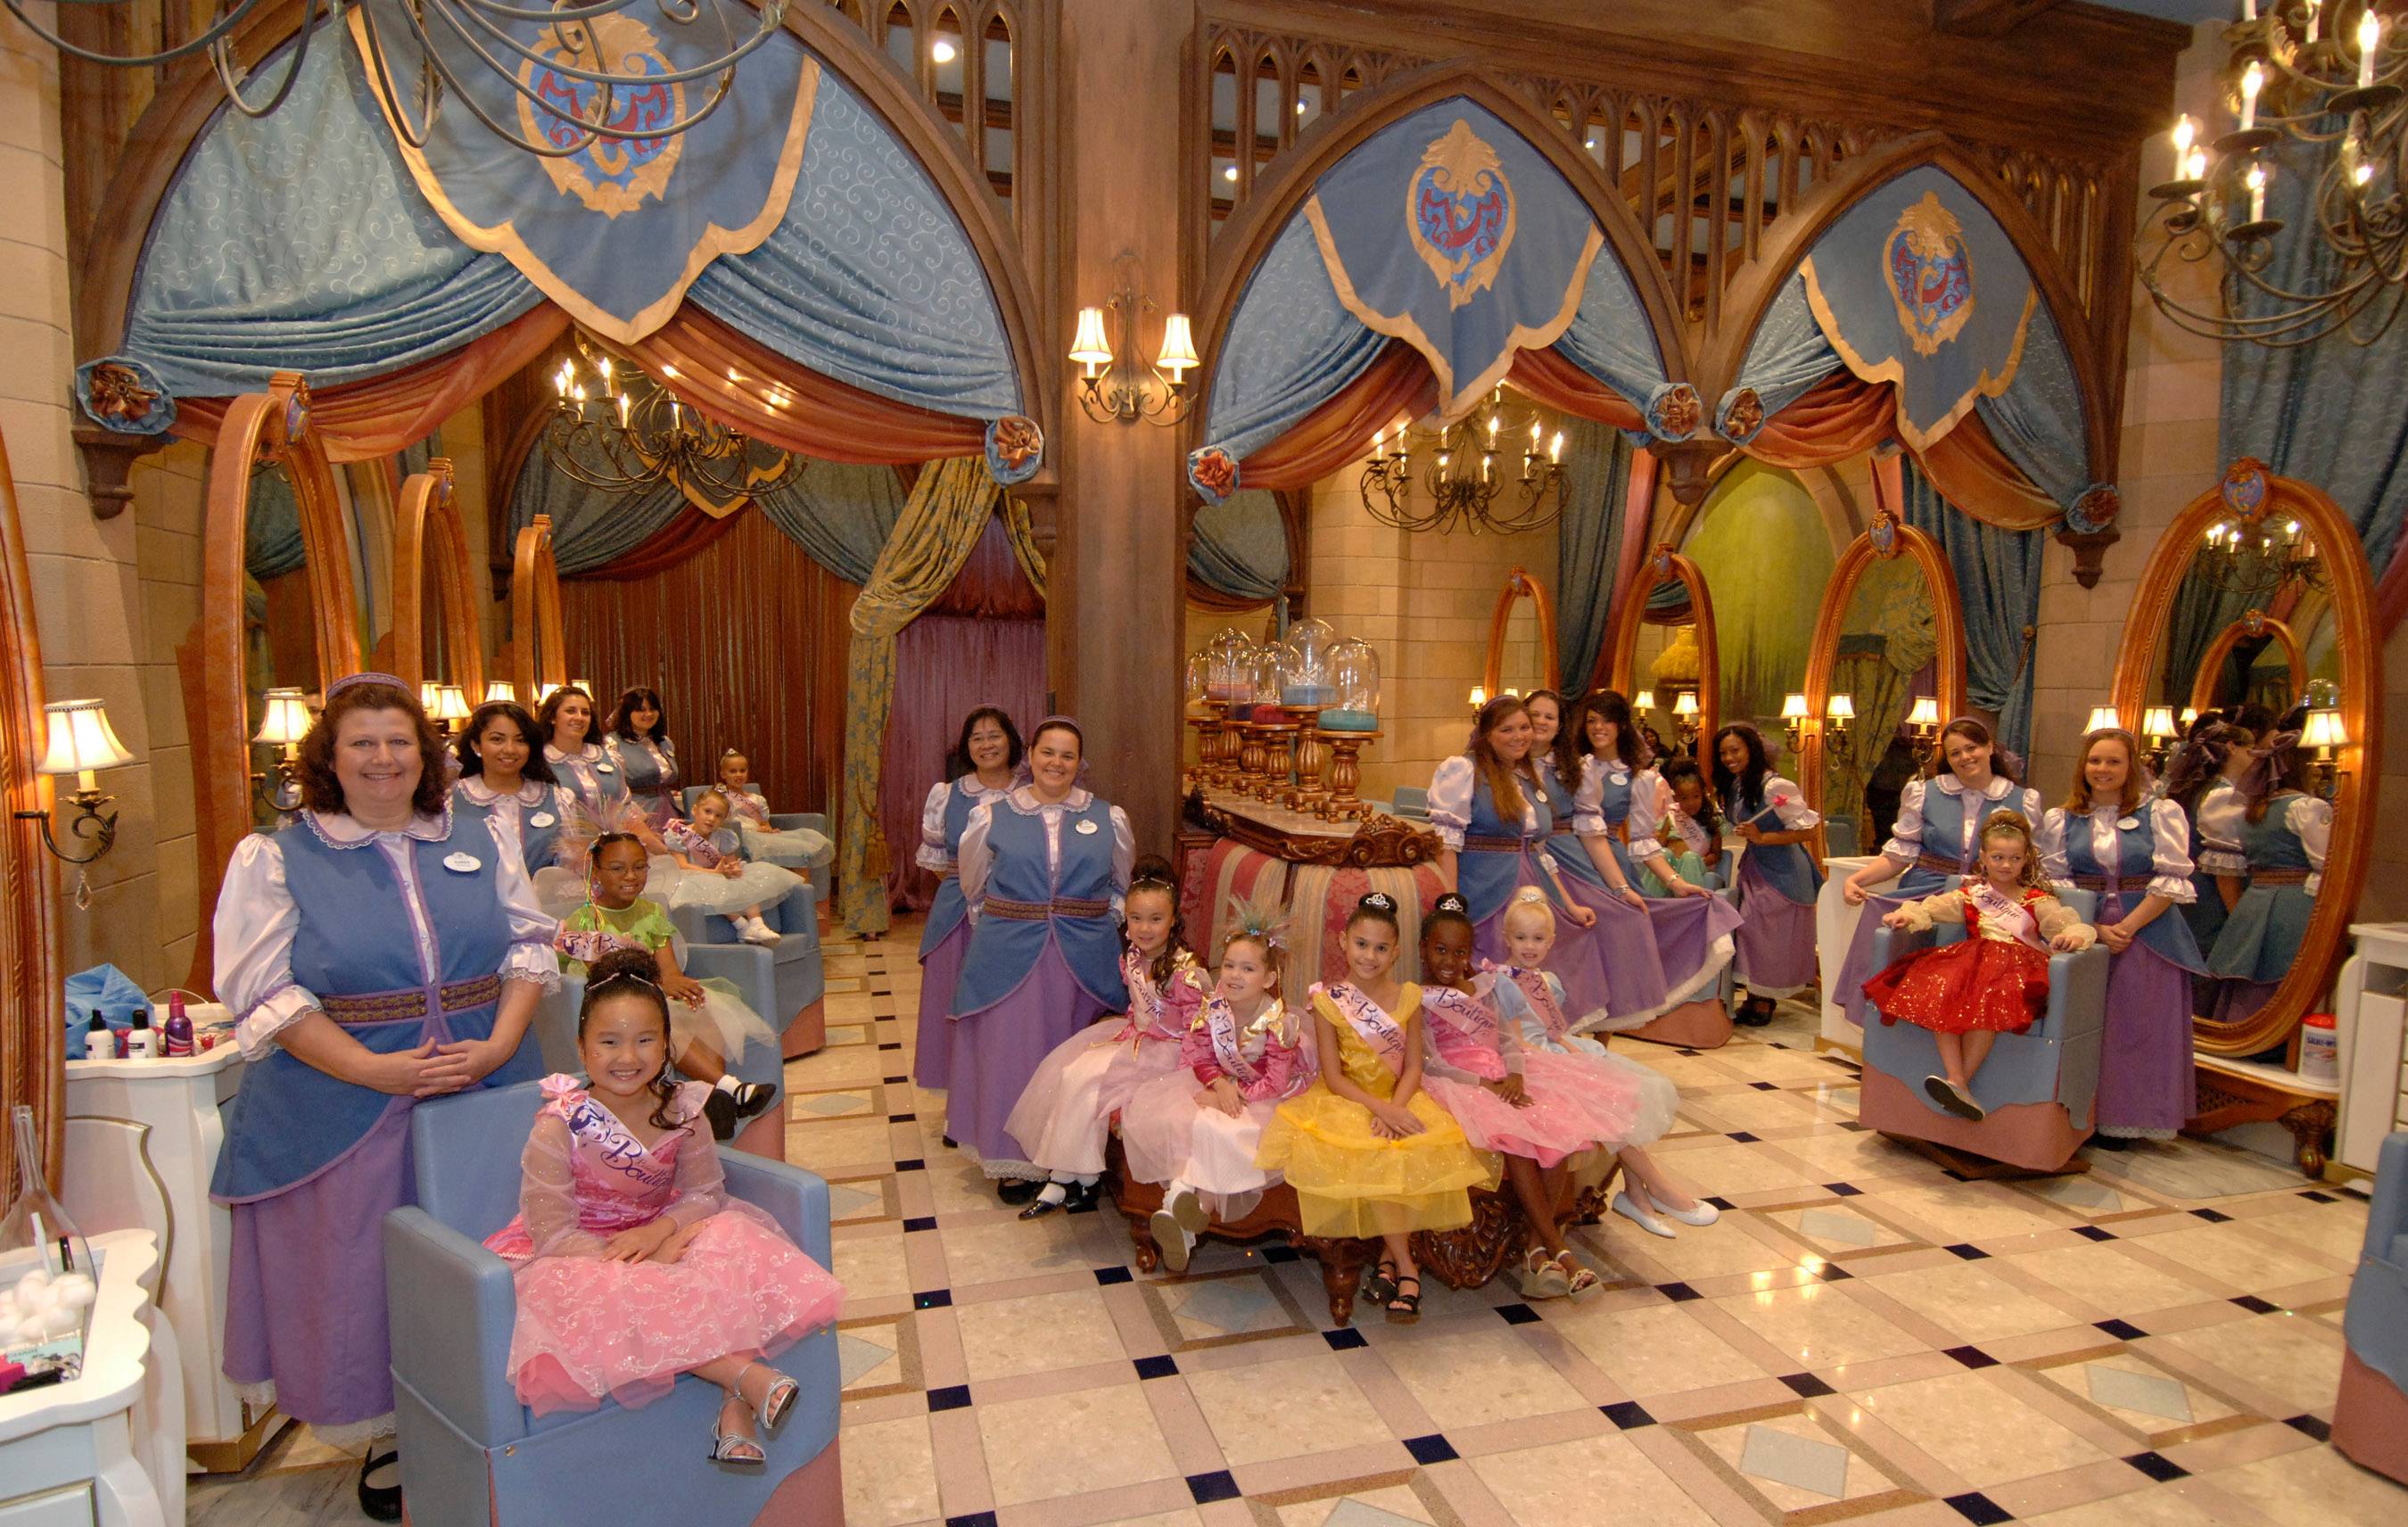 Reservations begin today for Bibbidi Bobbidi Boutique at Magic Kingdom opening later this month